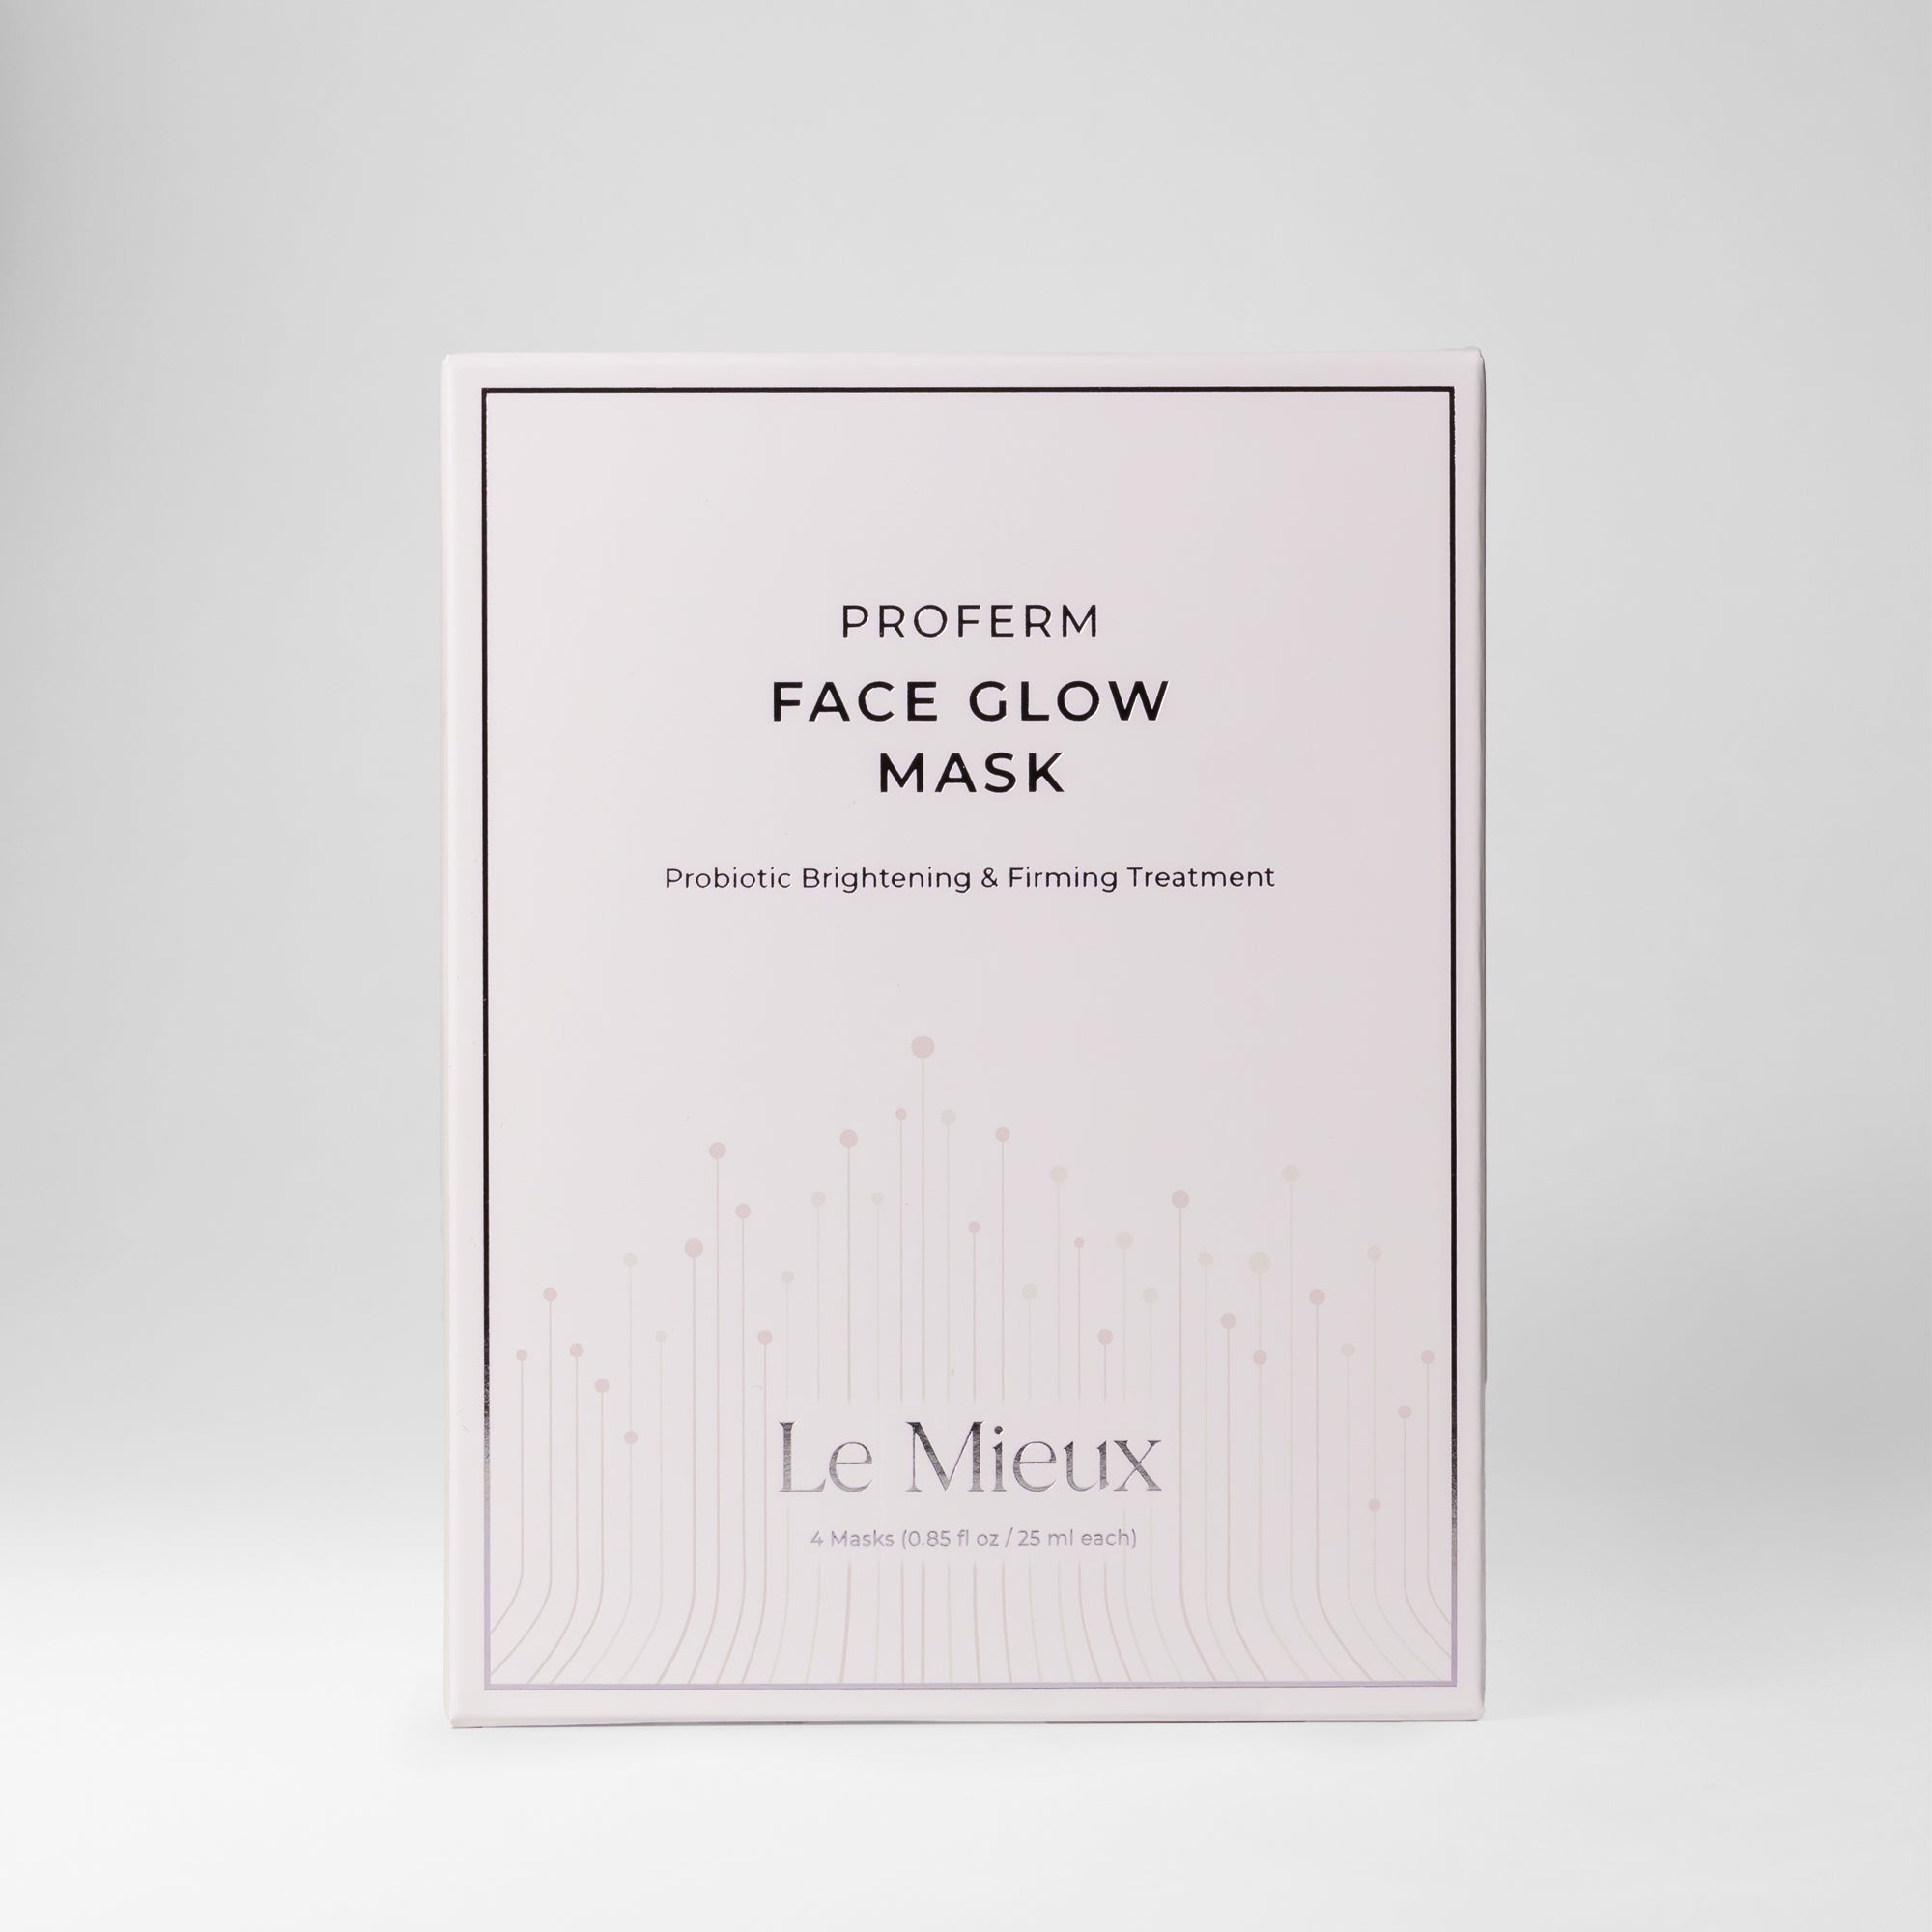  ProFerm Face Glow Mask from Le Mieux Skincare - featured